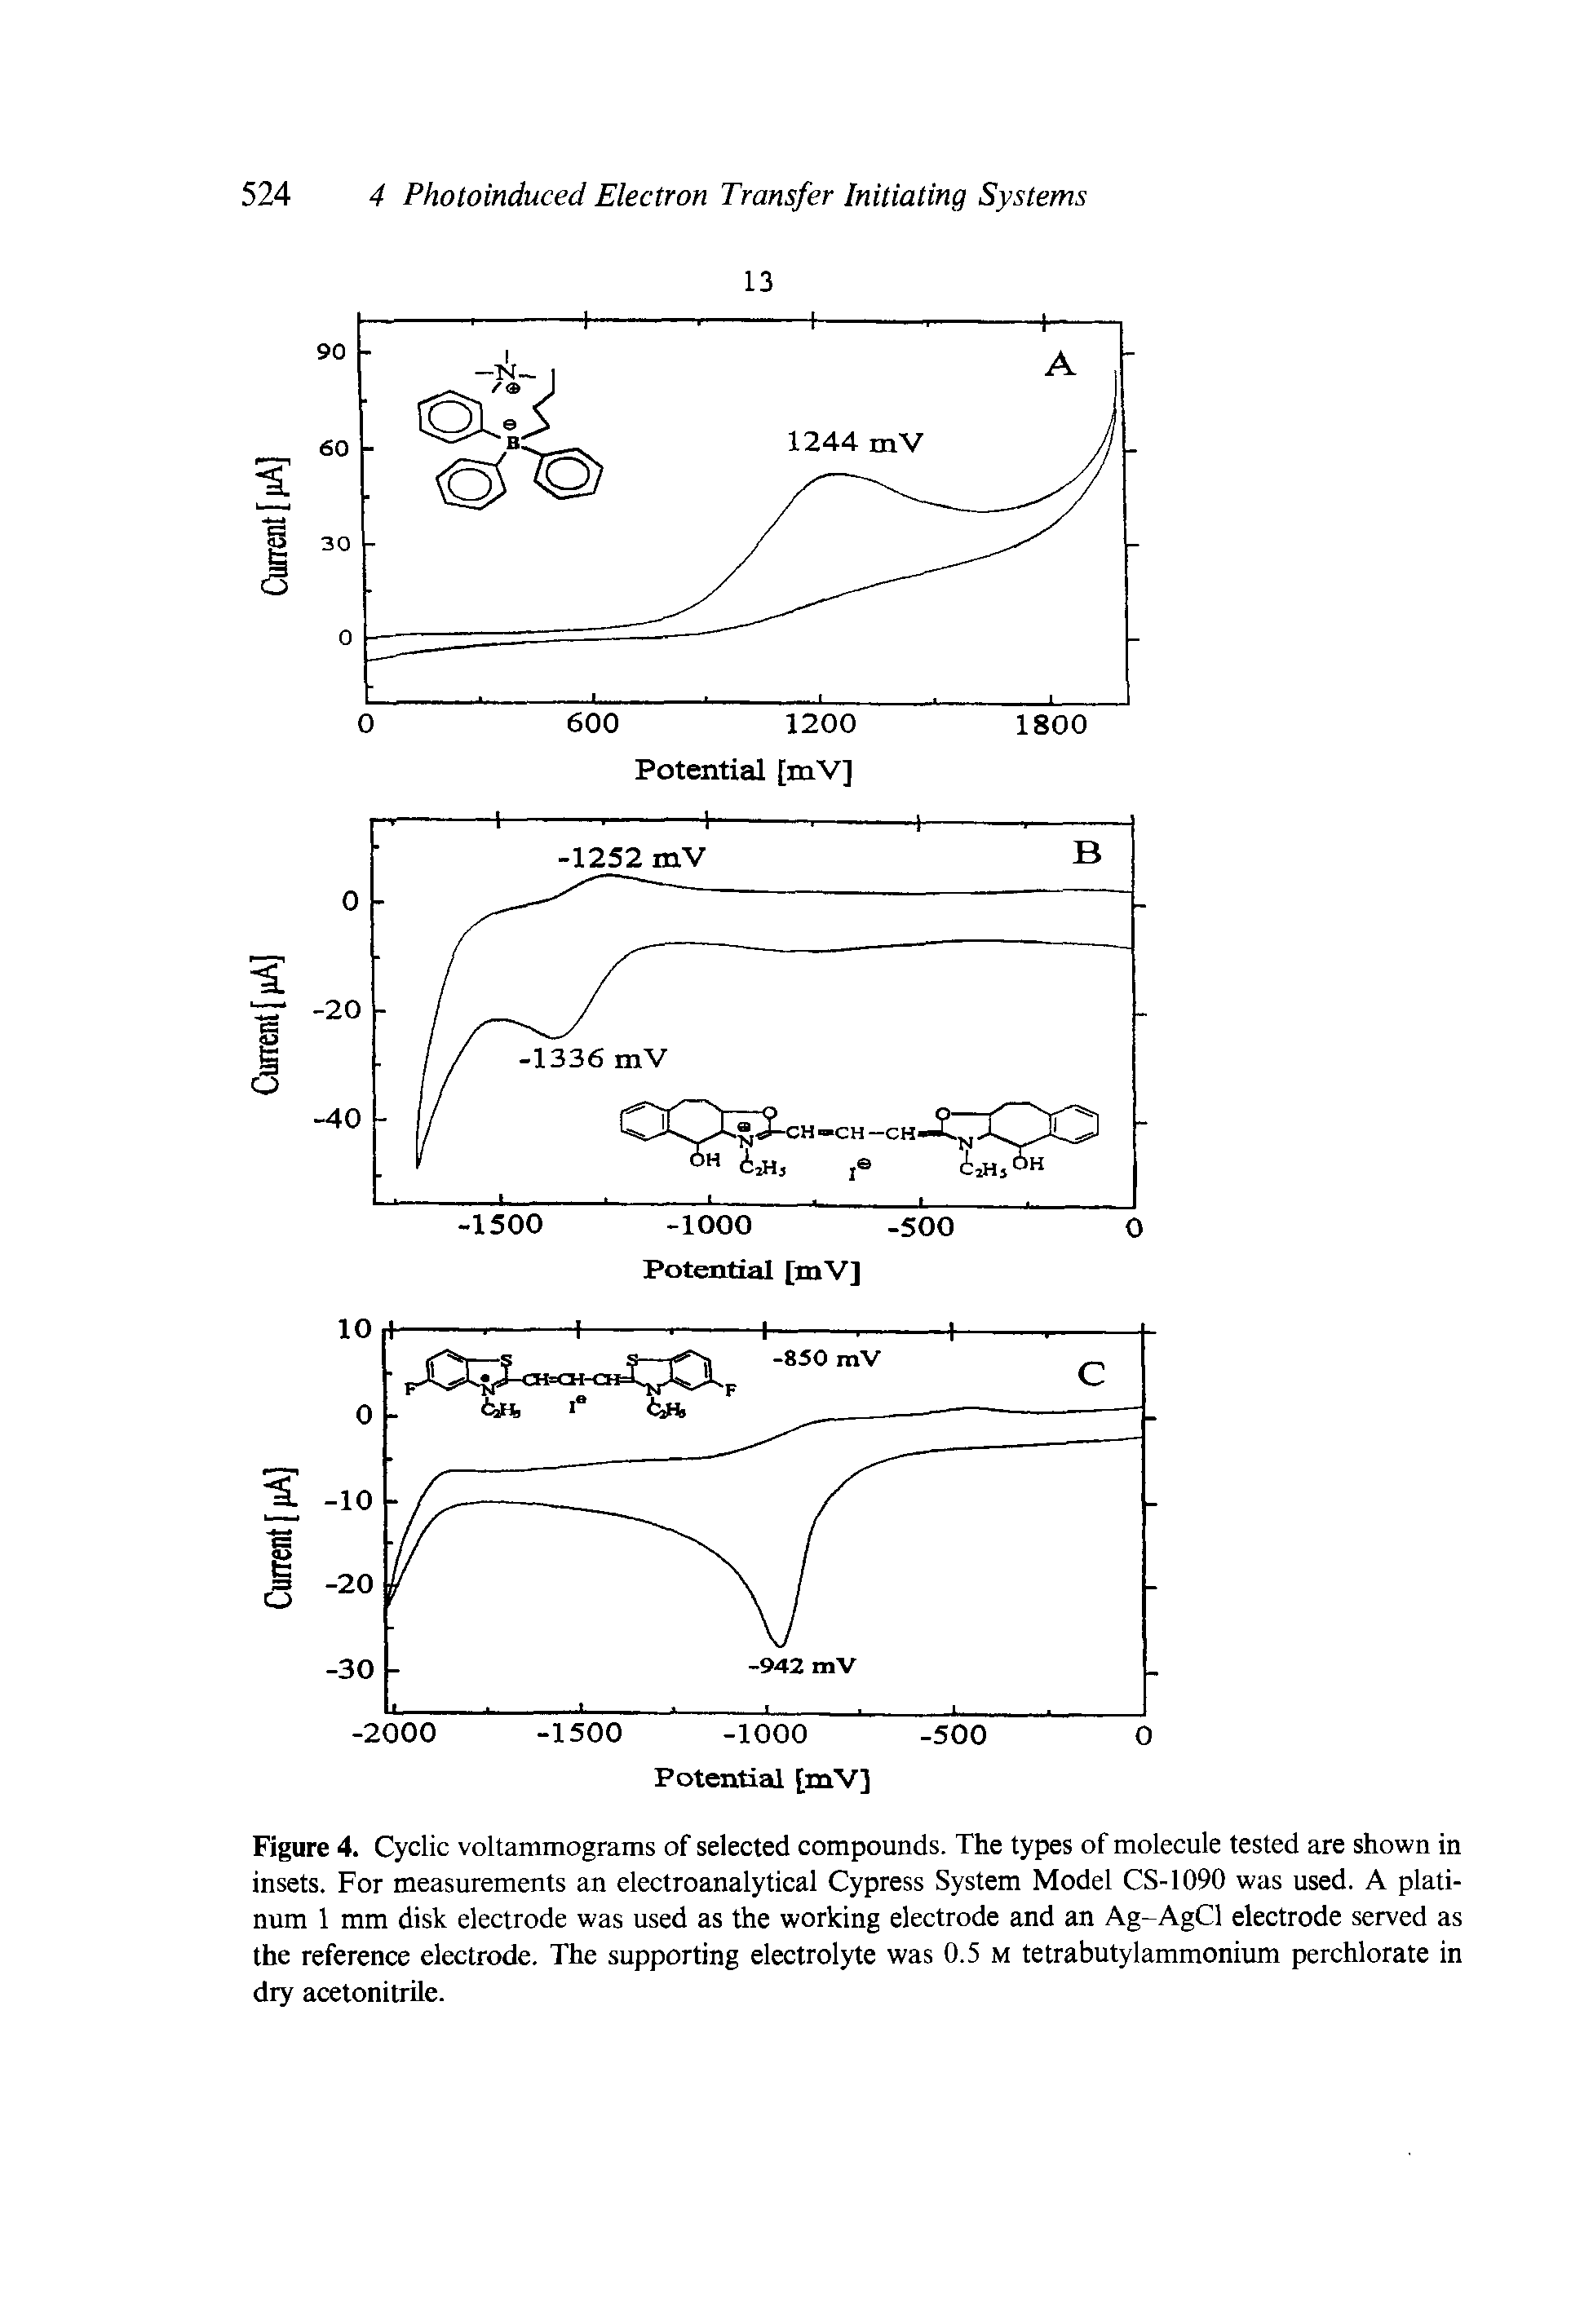 Figure 4. Cyclic voltammograms of selected compounds. The types of molecule tested are shown in insets. For measurements an electroanalytical Cypress System Model CS-1090 was used. A platinum 1 mm disk electrode was used as the working electrode and an Ag-AgCl electrode served as the reference electrode. The supporting electrolyte was 0.5 m tetrabutylammonium perchlorate in dry acetonitrile.